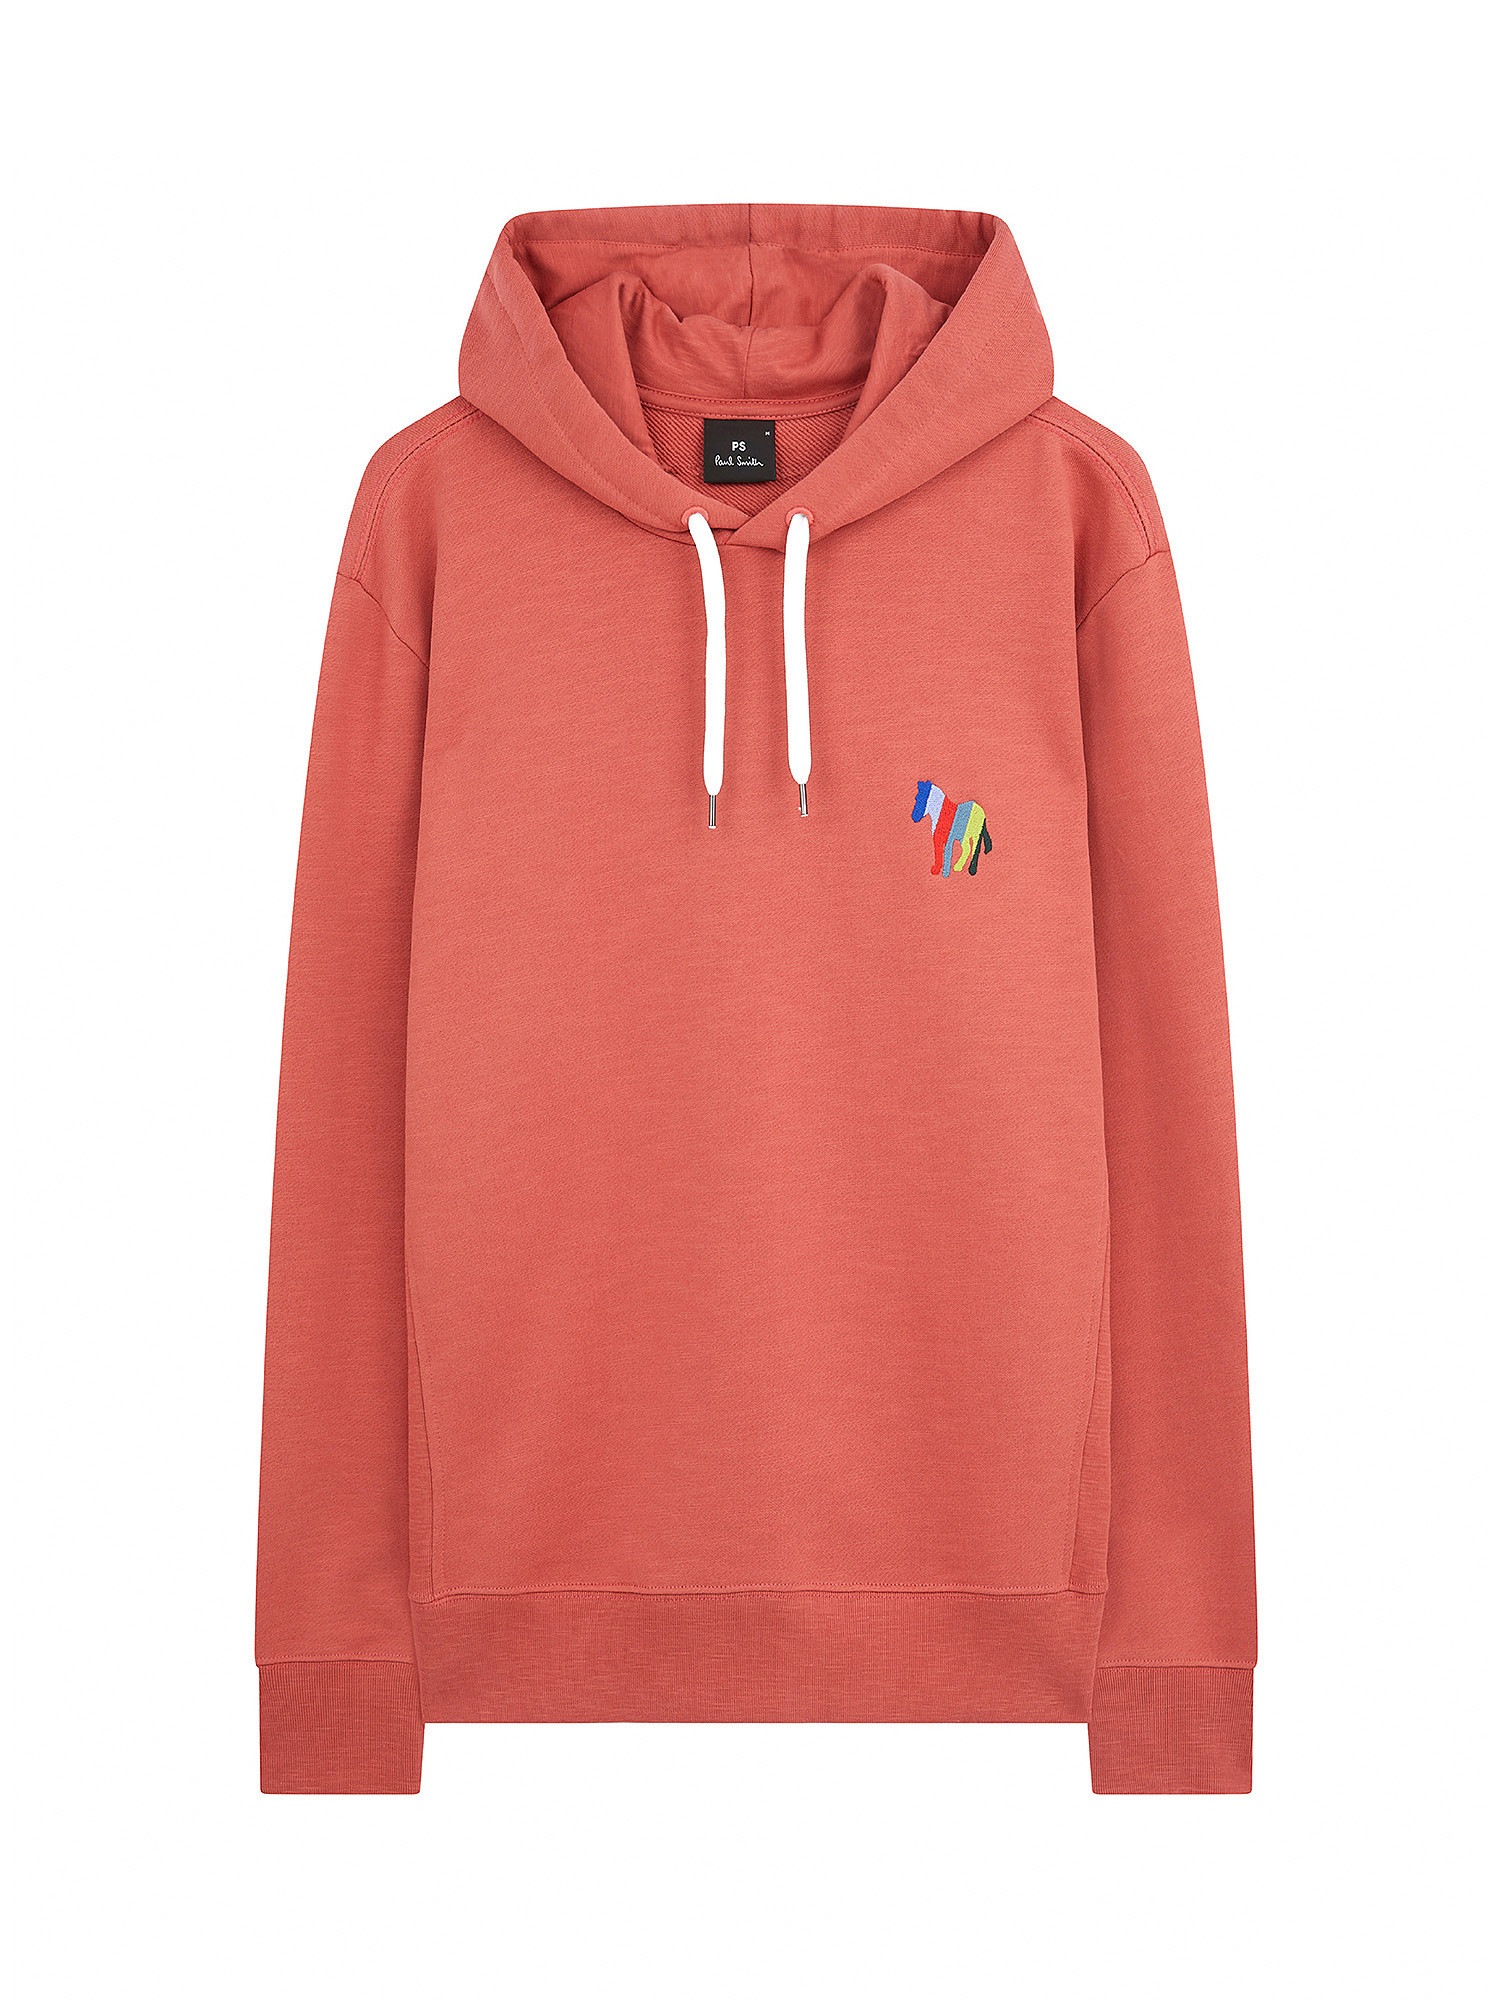 Men's hooded sweatshirt with zebra logo embroidery, Coral Red, large image number 0